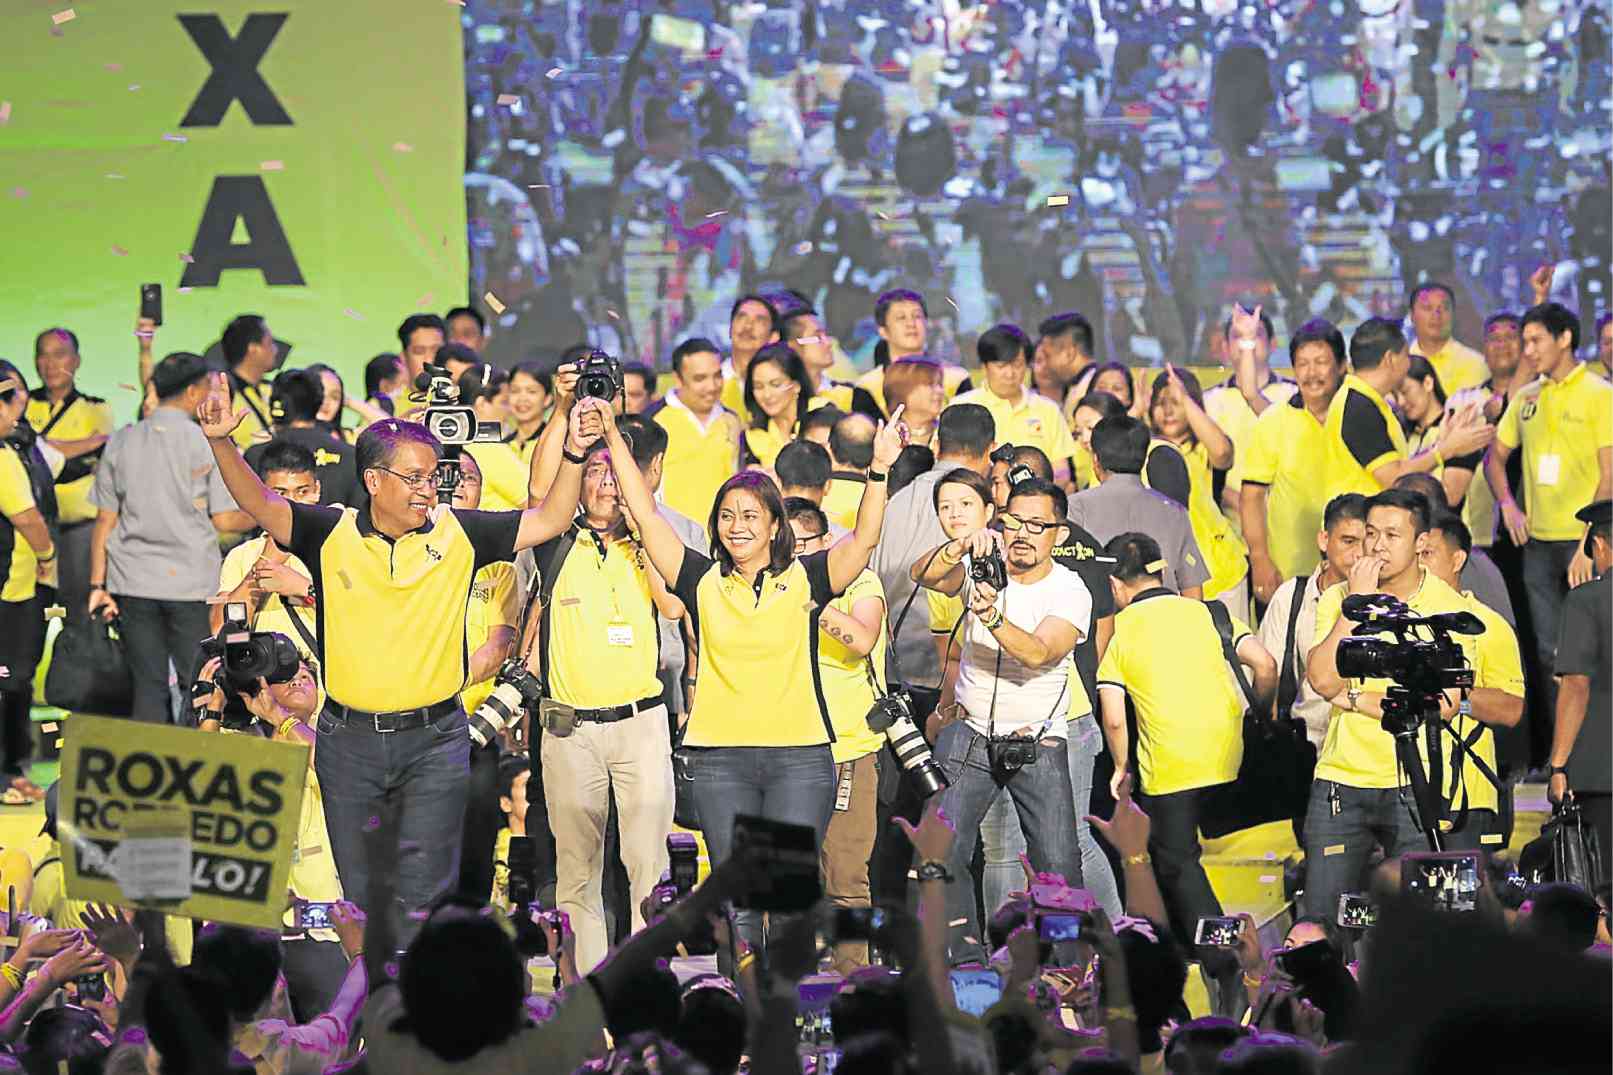 LAST CAMPAIGN DAY Liberal Party standard-bearer Mar Roxas and his running mate, Leni Robredo, greet supporters during their “miting de avance” on Saturday at Quezon Memorial Circle in Quezon City. JOAN BONDOC